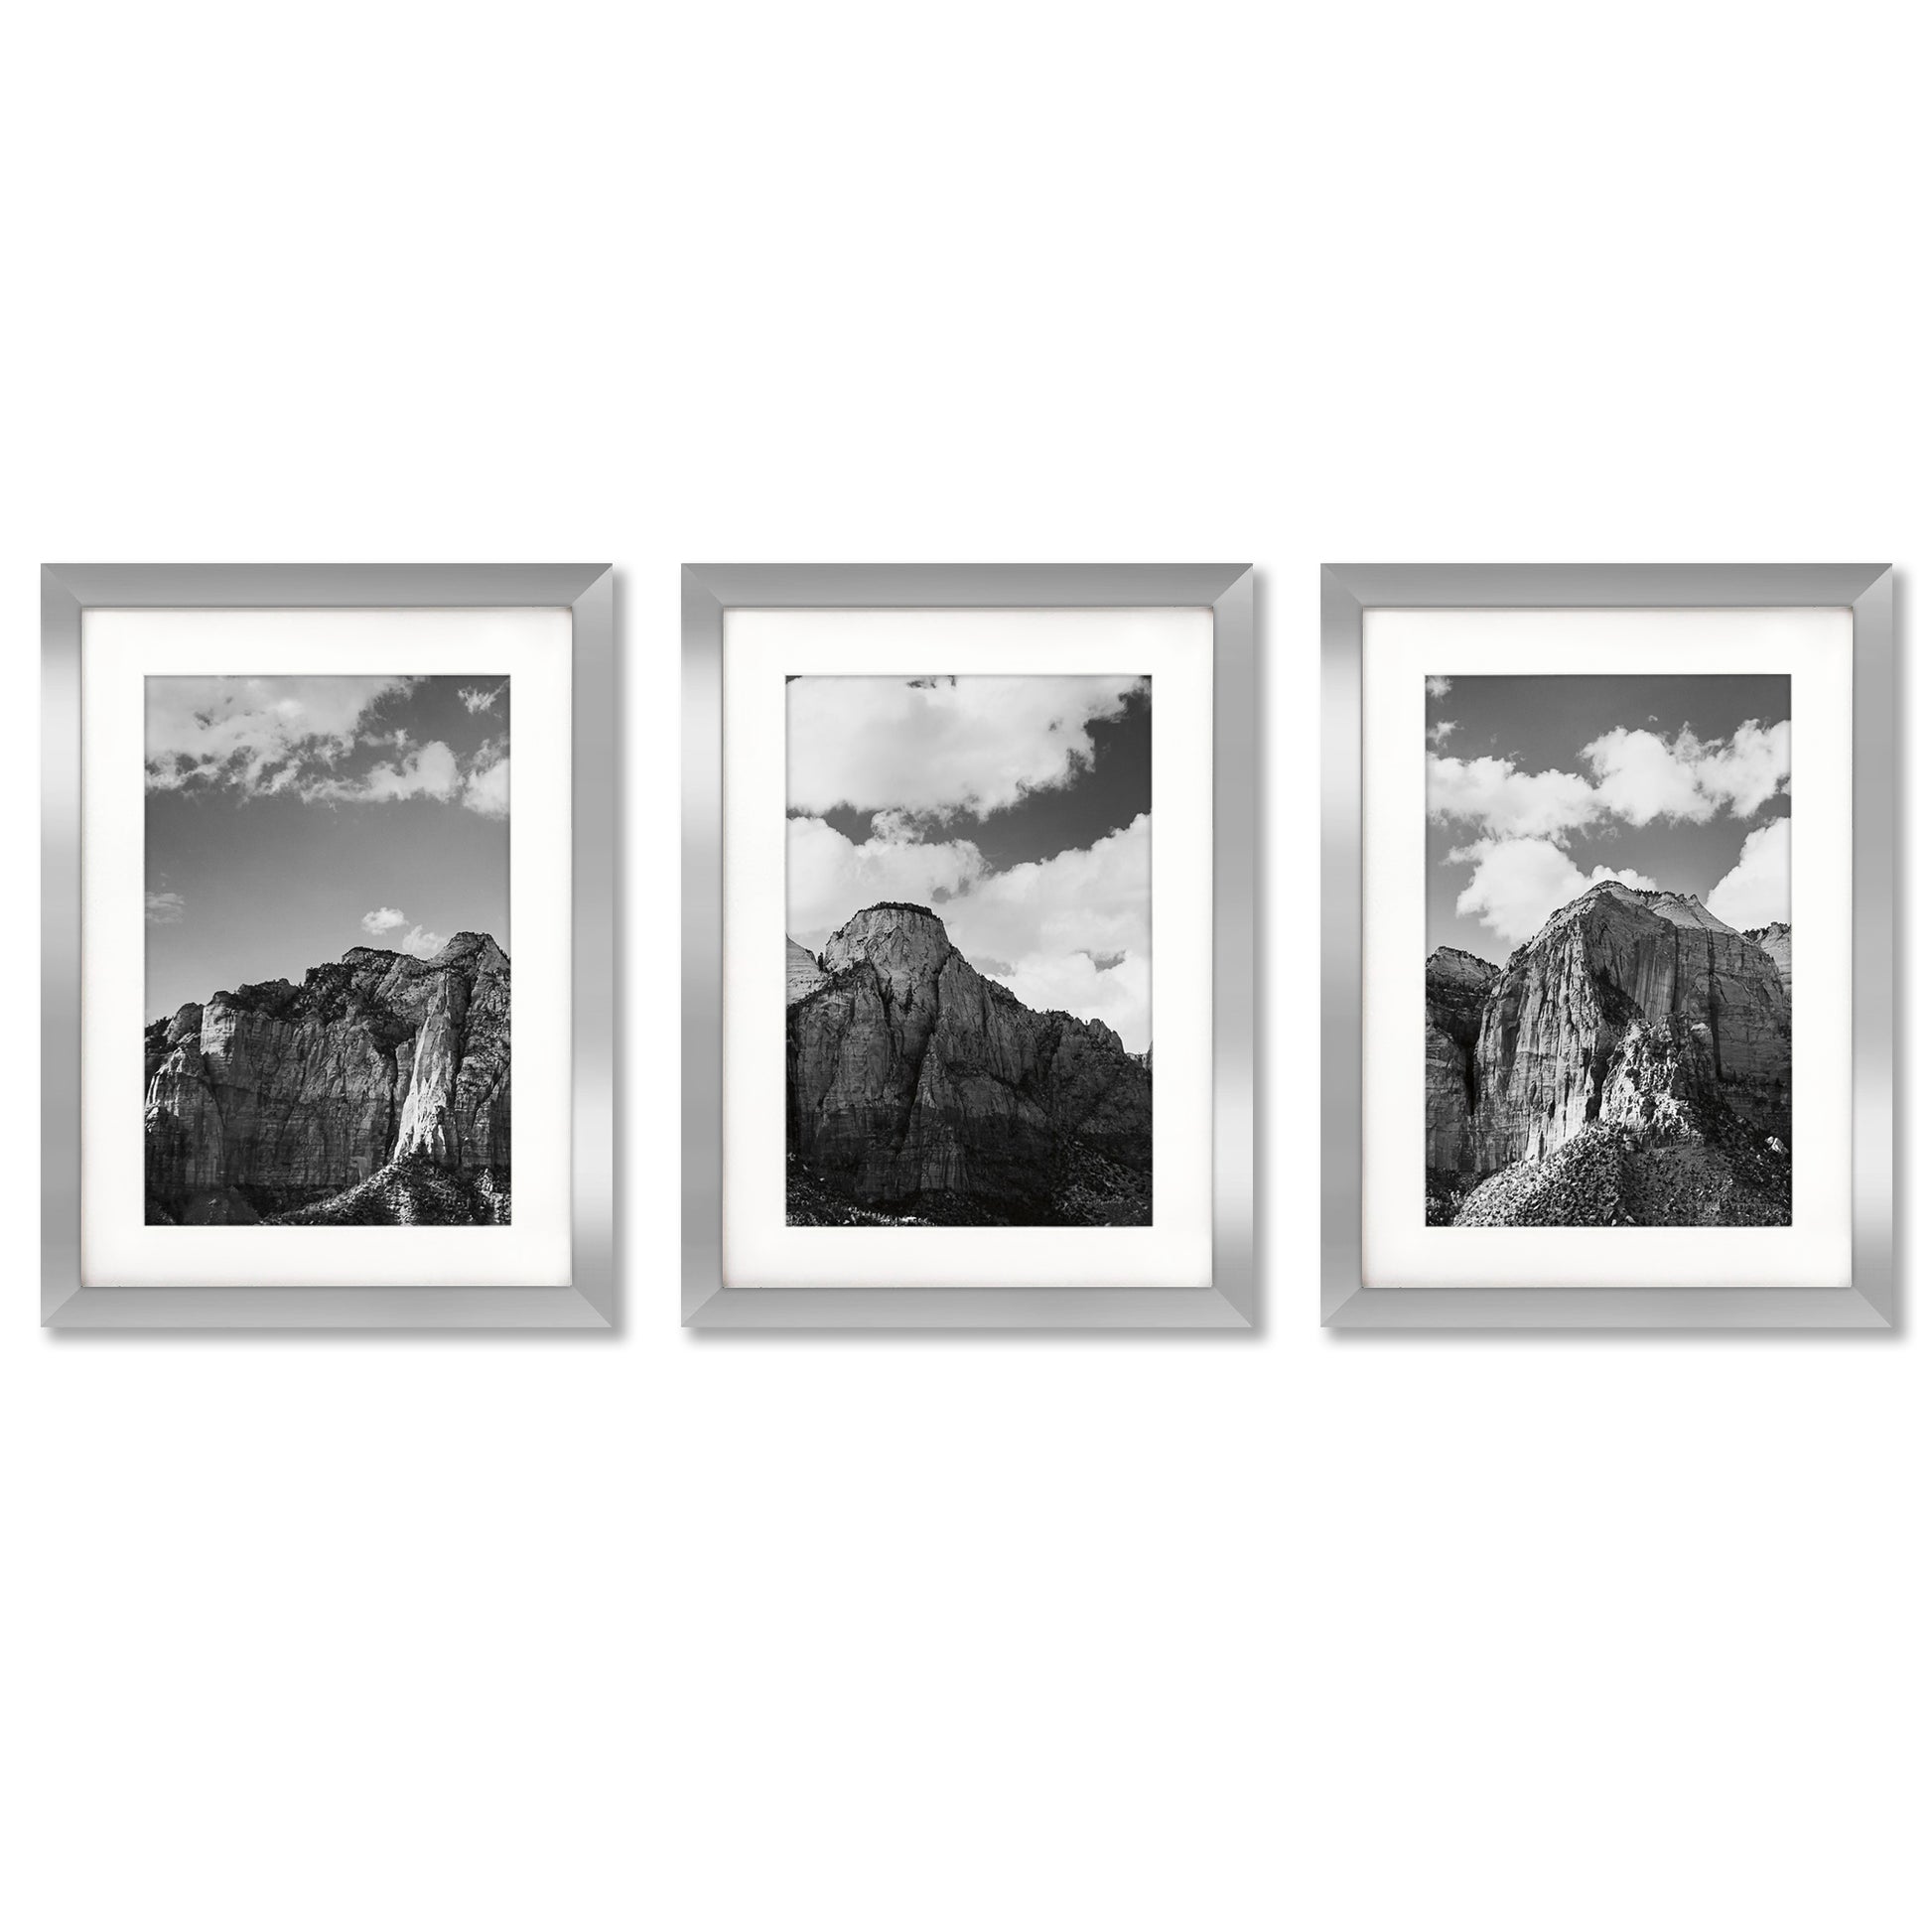 Zion Canyon by Laura Marshall - 3 Piece Gallery Framed Print Art Set